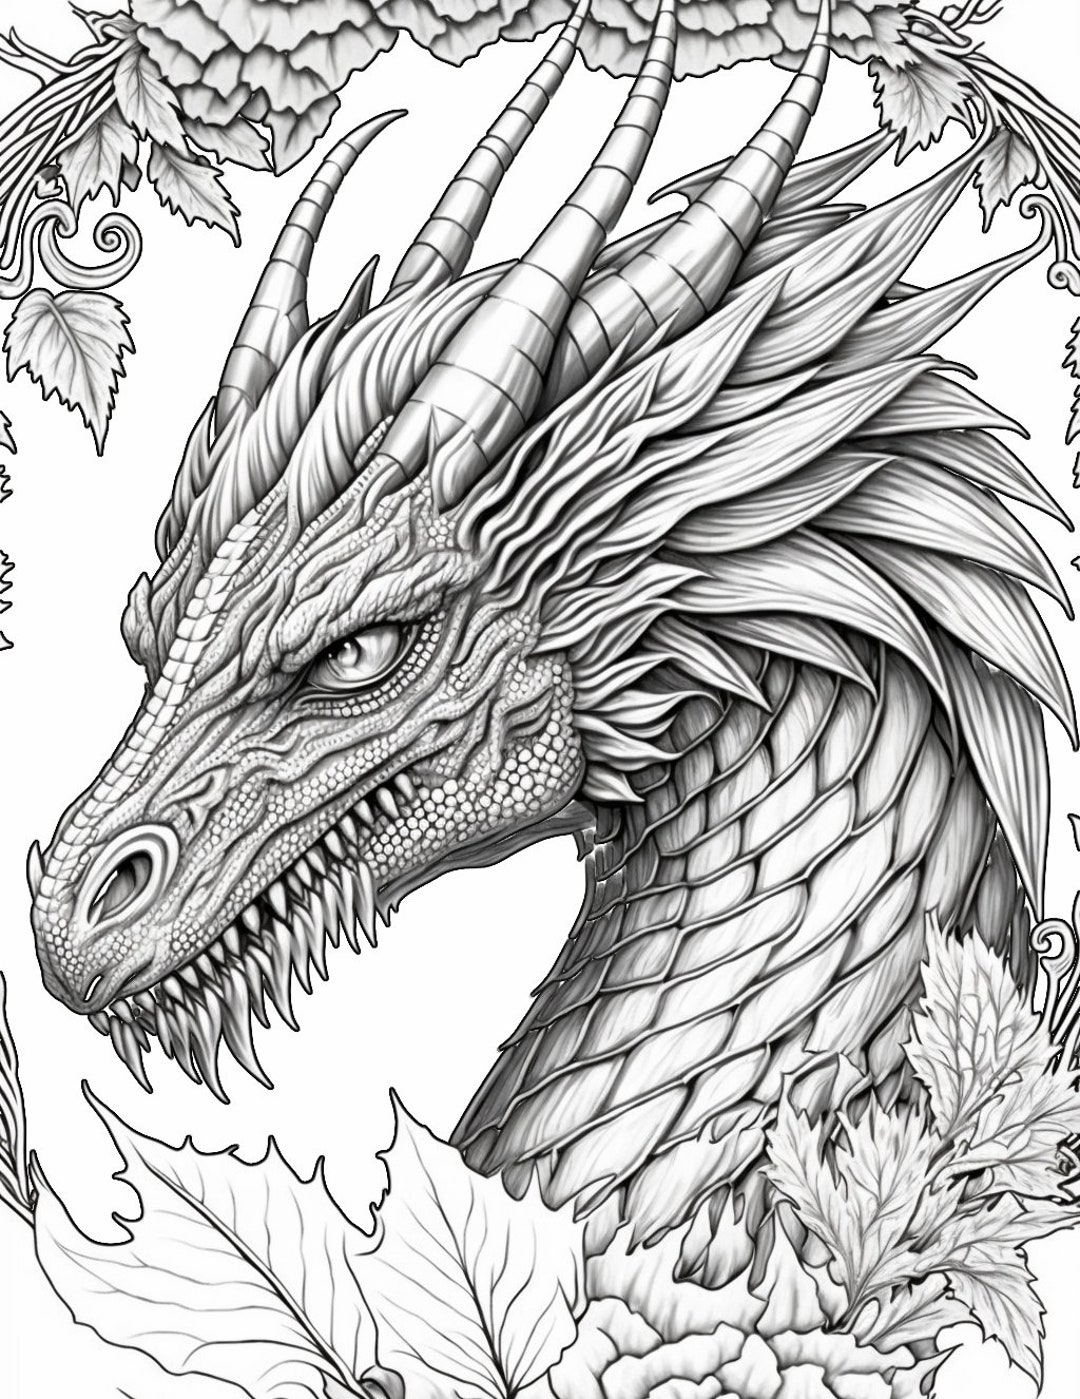 Relaxing Coloring Pages: Dragons 100 Pages - Etsy